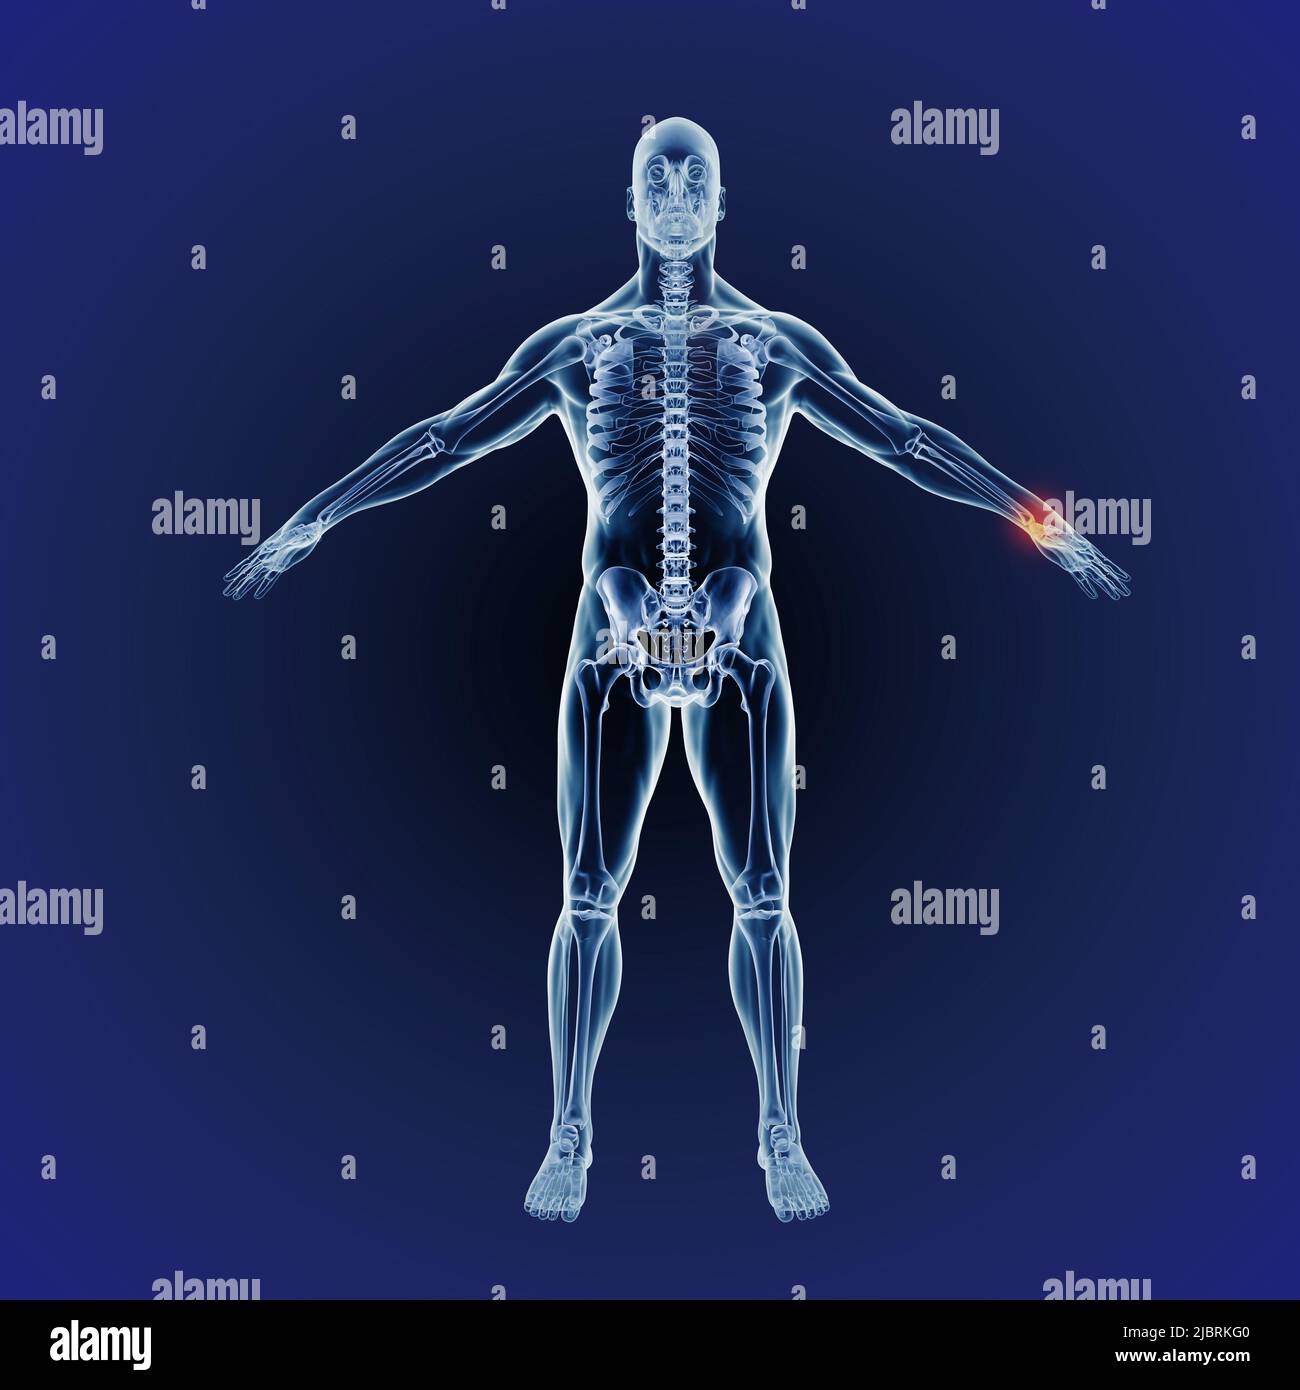 Wrist and inflammation pains. When inflammation strikes. A full length cgi representation of the human body indicating the skeletal structure. Stock Photo